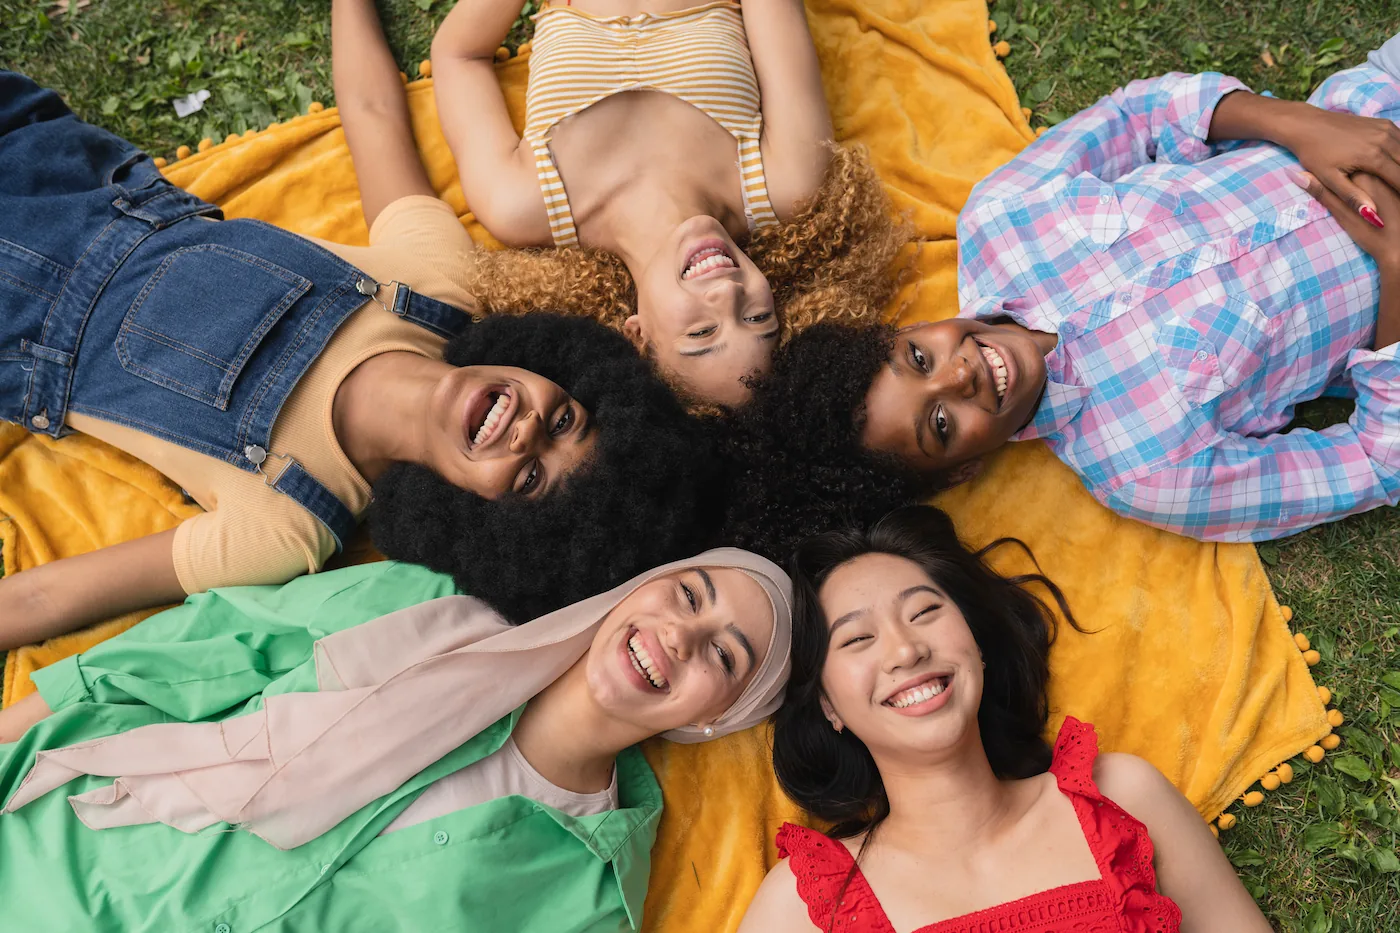 Five diverse young women lying head to head on a yellow blanket in a park, smiling and enjoying each other's company.